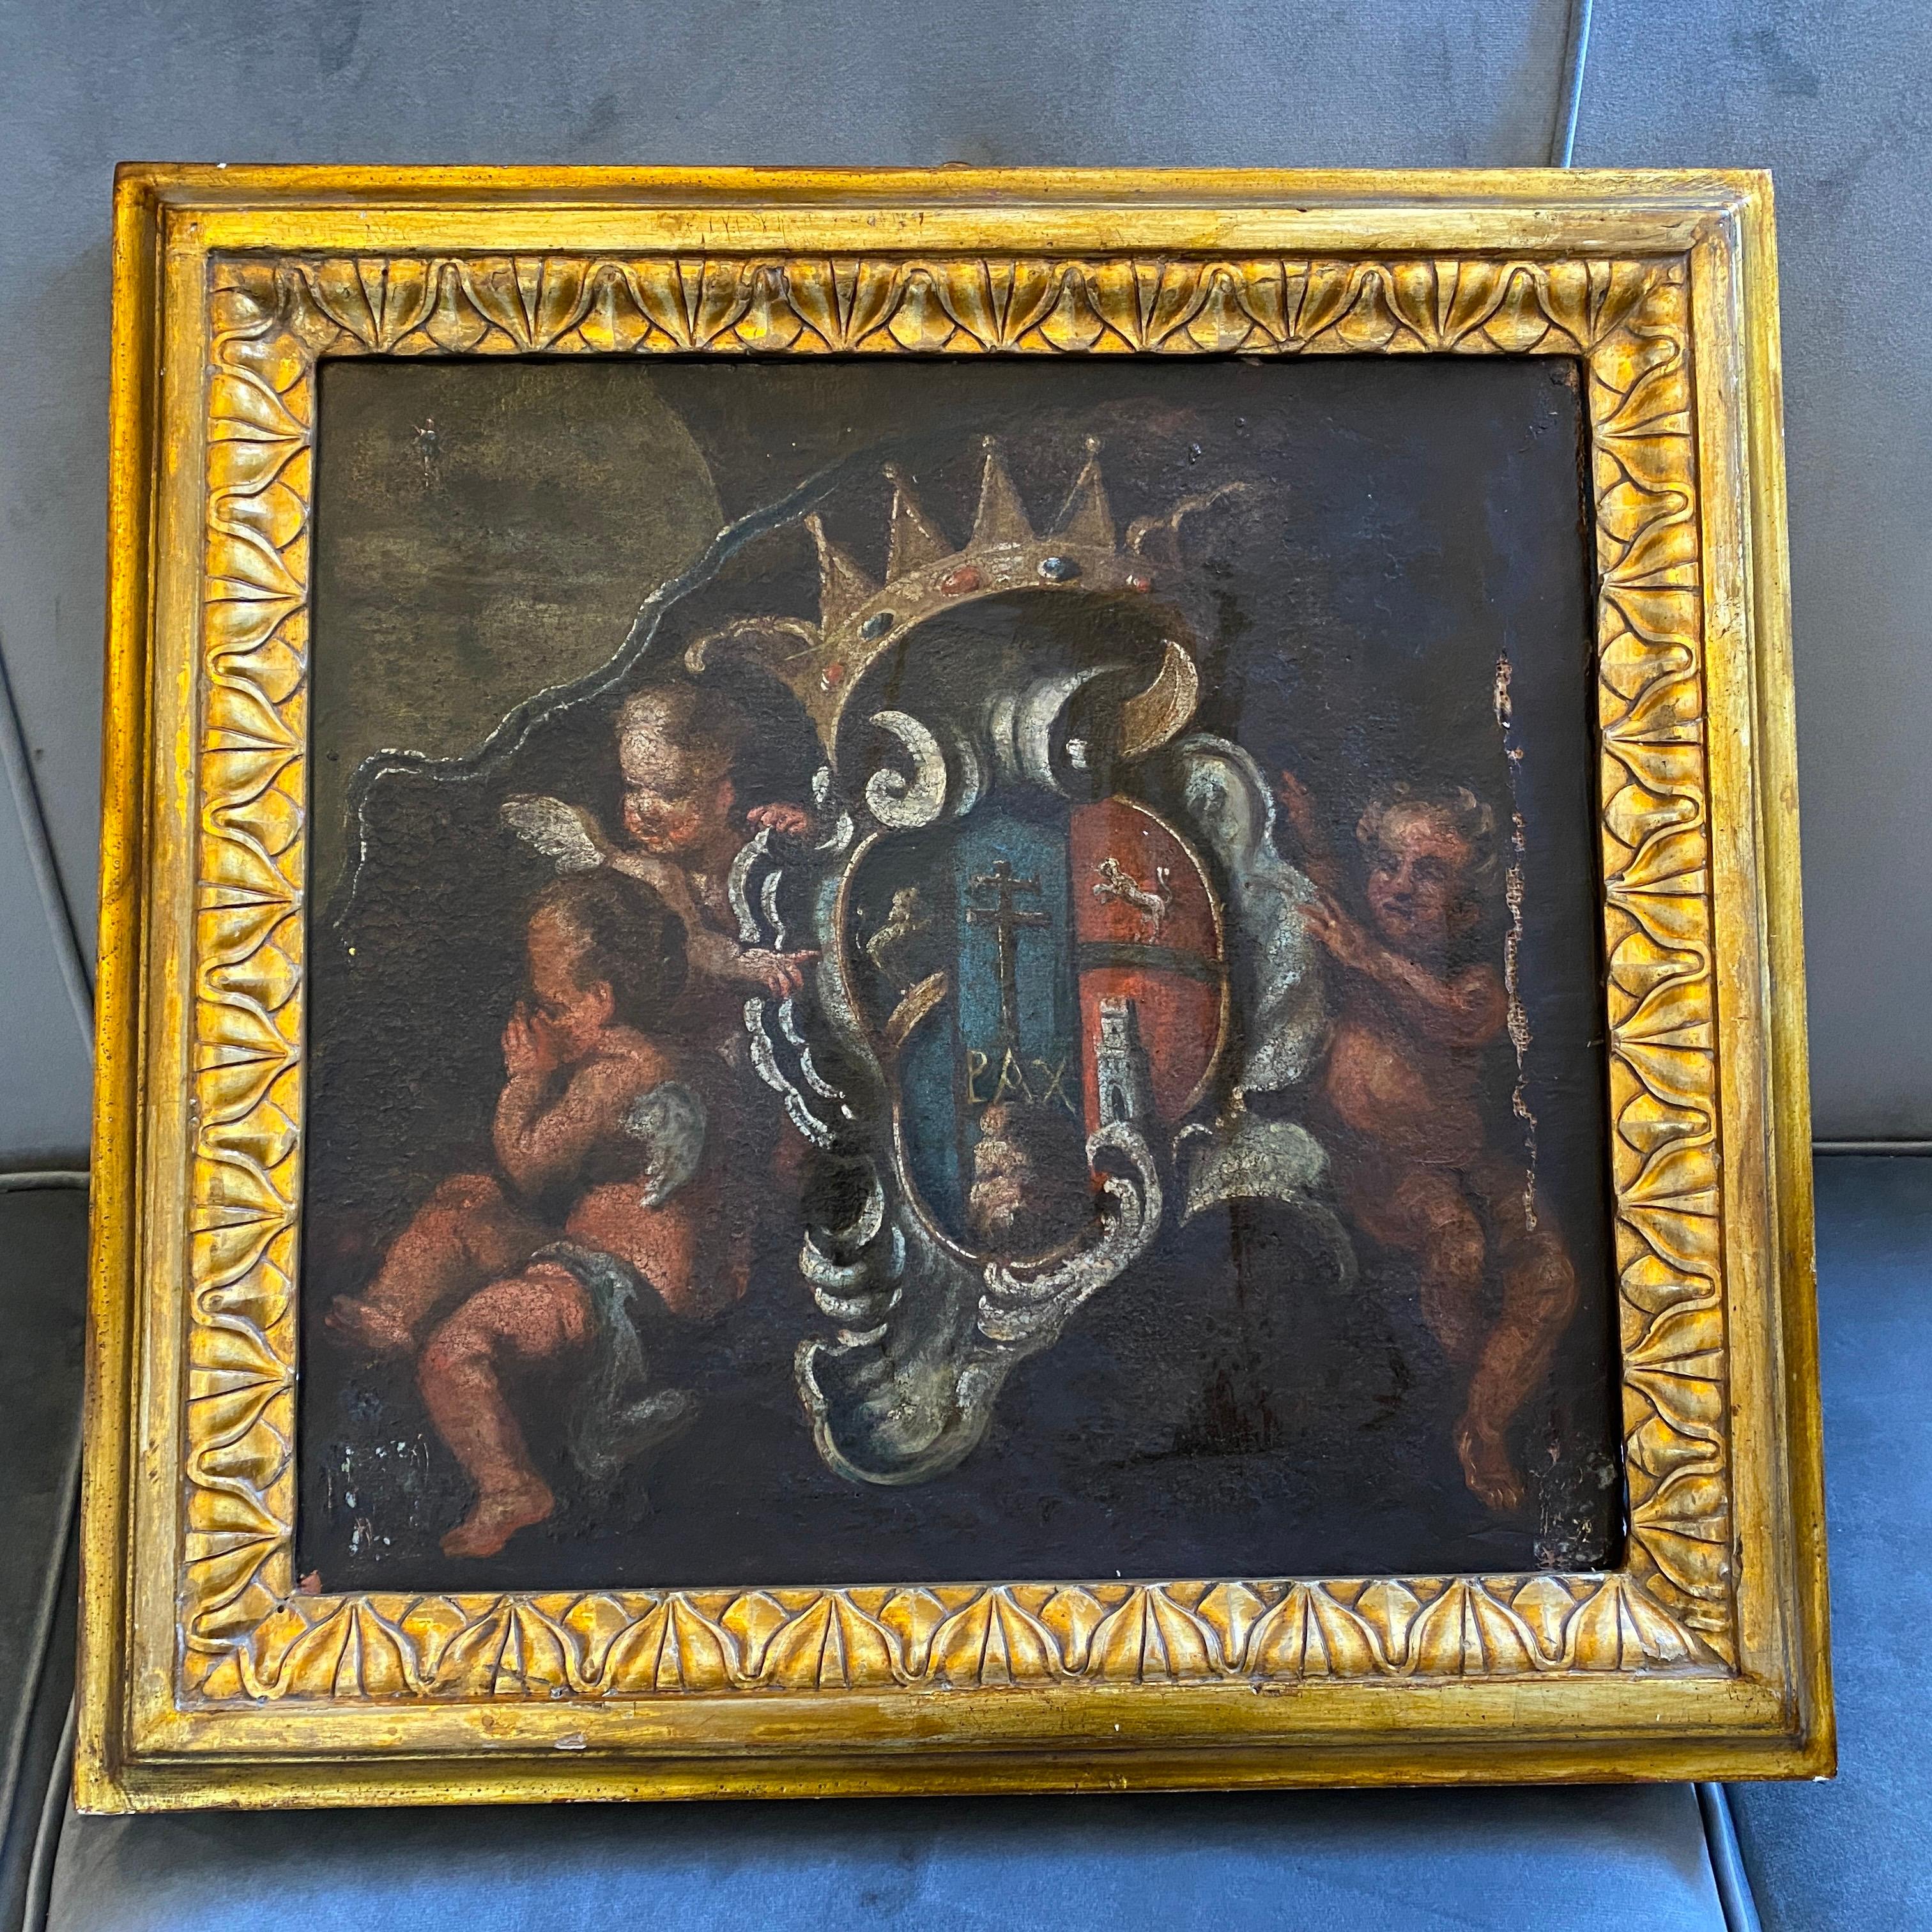 Baroque 17th Century Italian Painting Fragment of Angels with a Noble Coat of Arms